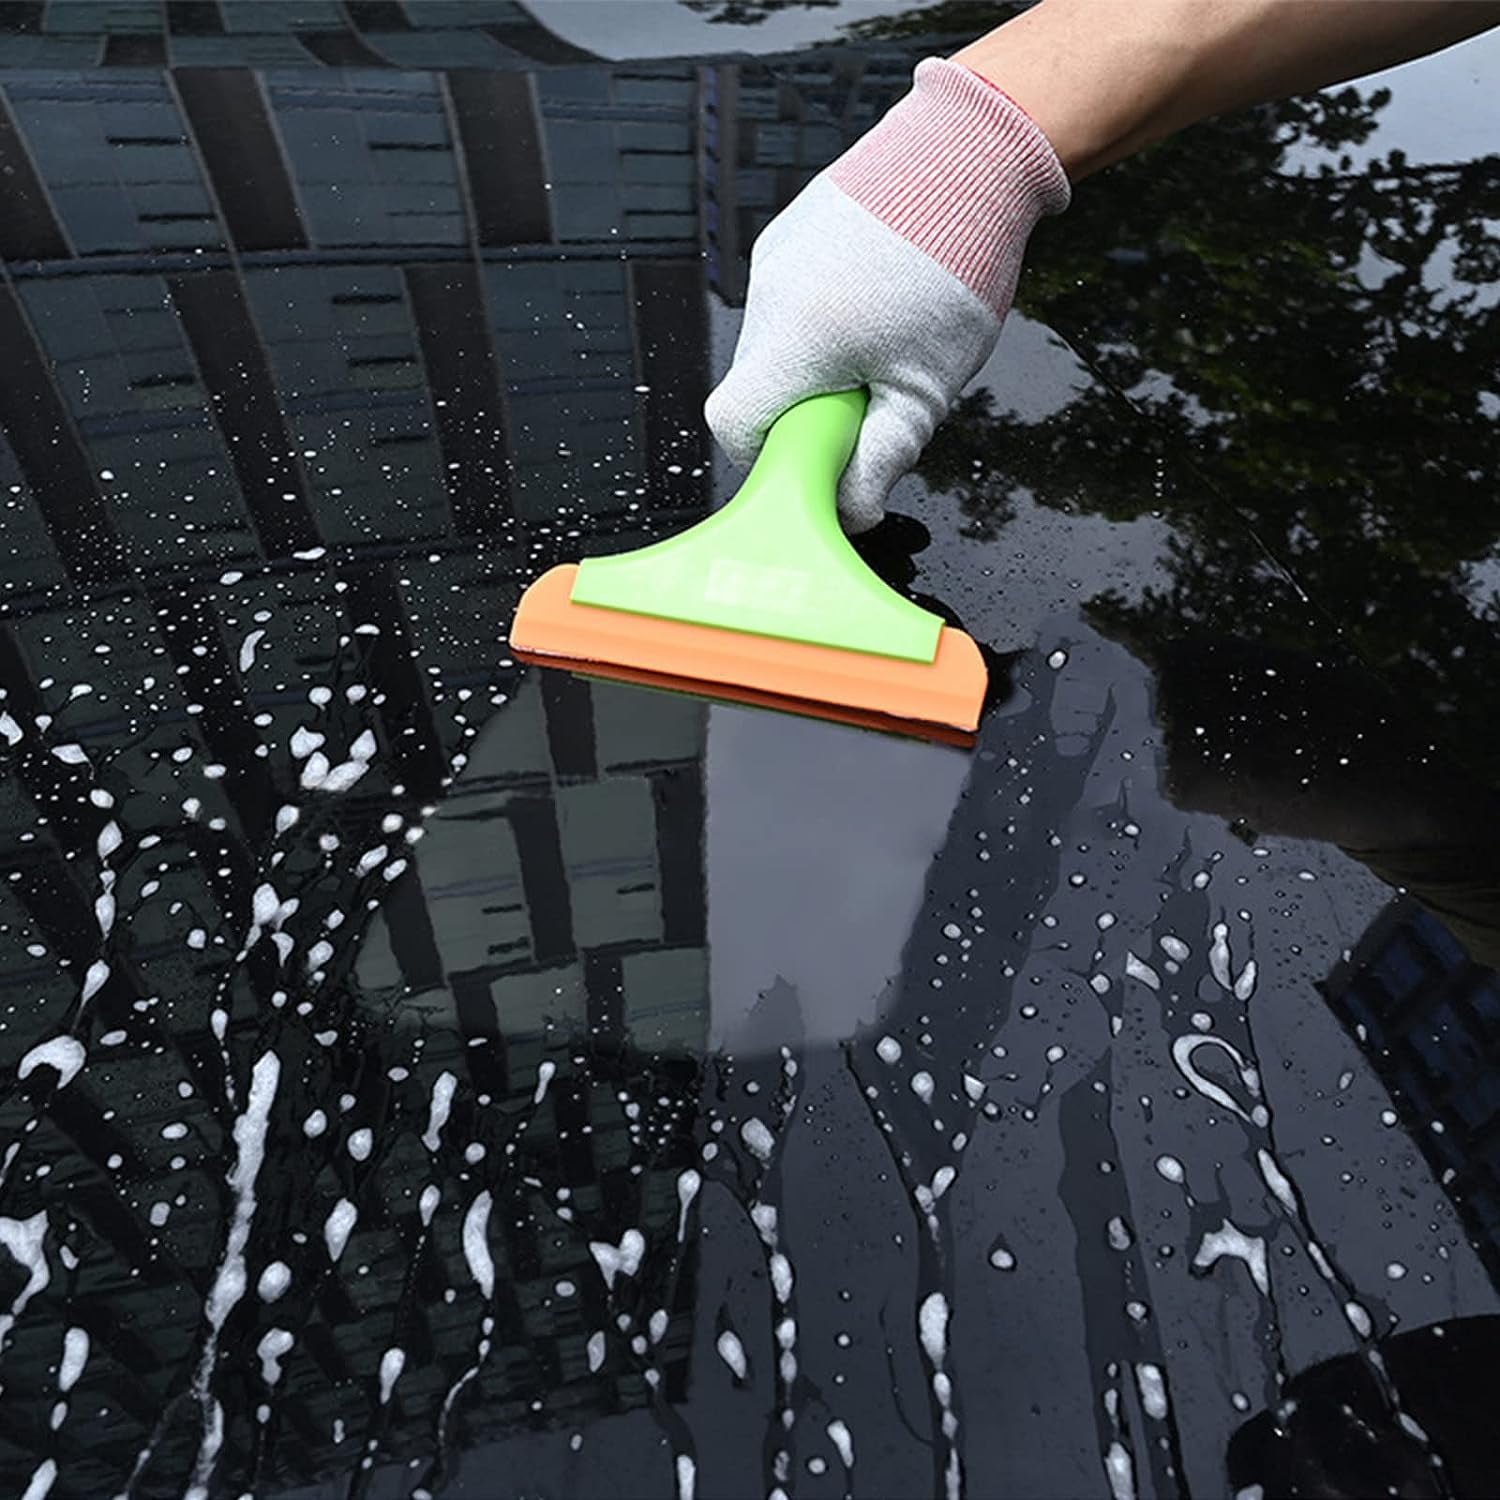 AUKEPO Super Flexible Silicone Squeegee, Window Tint Water Blade, Shower Squeegee with No-Slip Handle, Auto Cleaning Tool Accessories